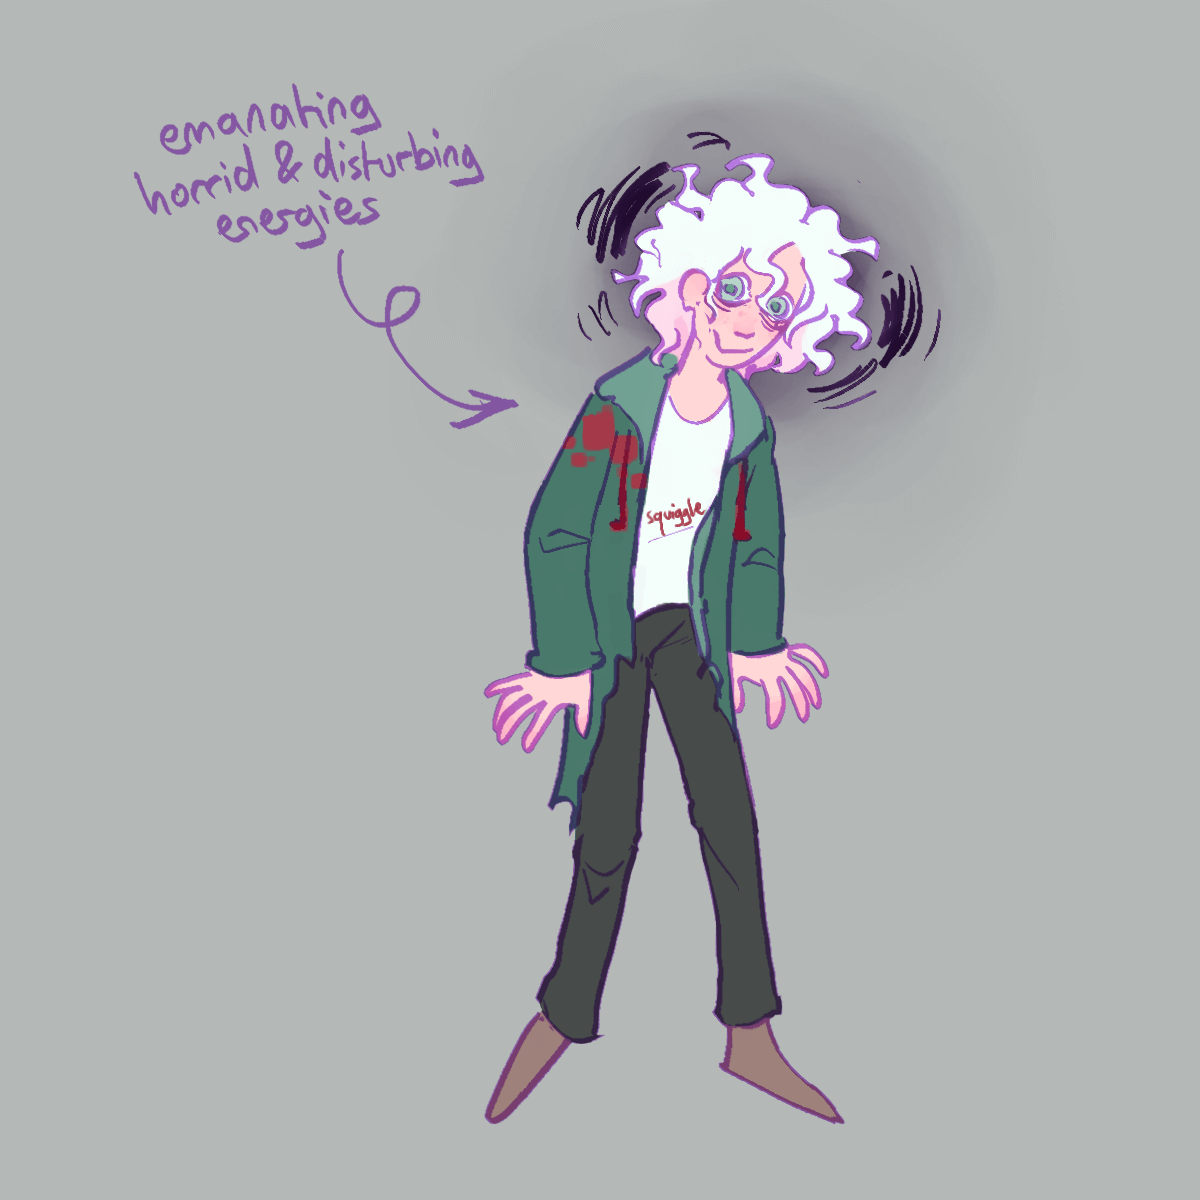 a drawing of nagito standing with an unsettling expression. an arrow points
		towards him with the caption 'emanating horrid & disturbing energies'.